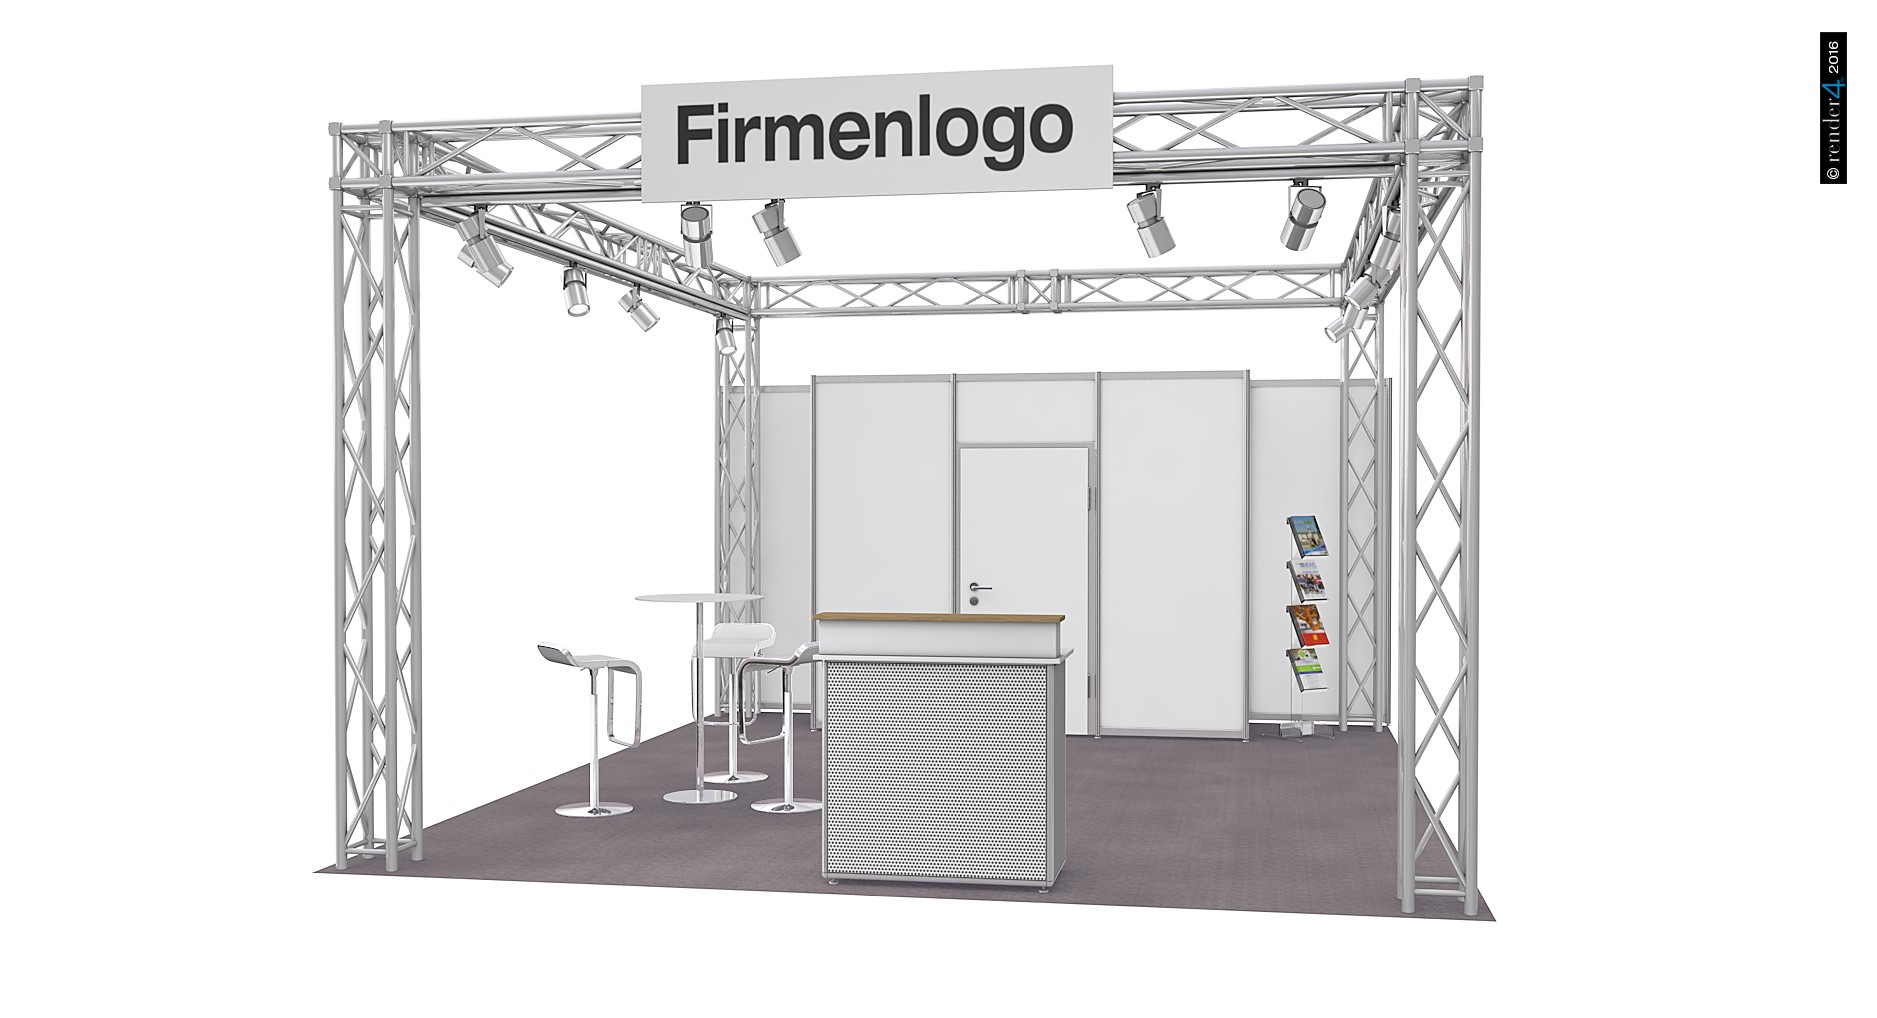 Exhibition booth - Basis booths - Event